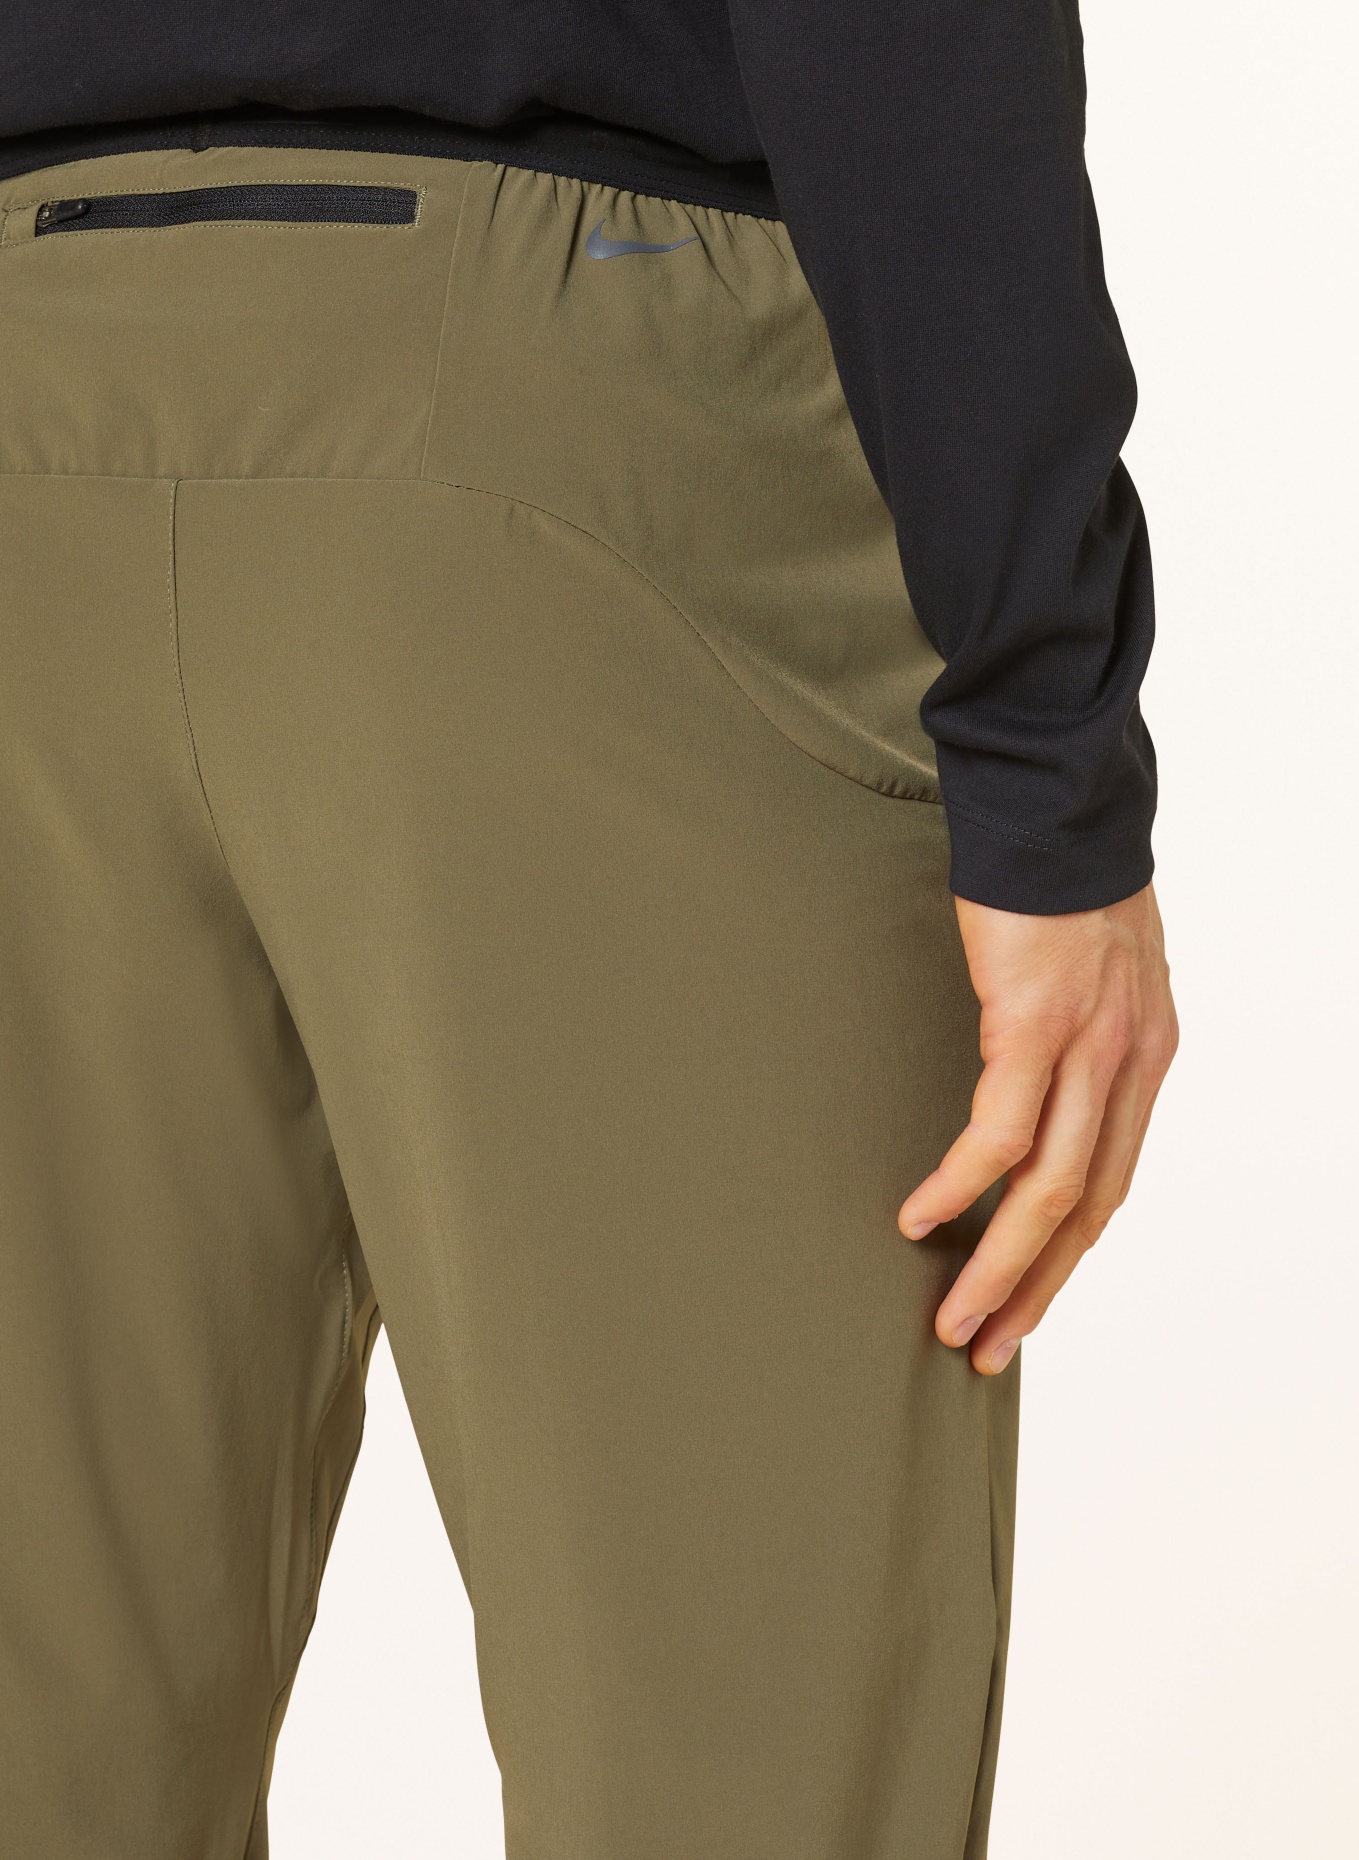 Nike Running pants TRAIL DAWN, Color: OLIVE (Image 6)